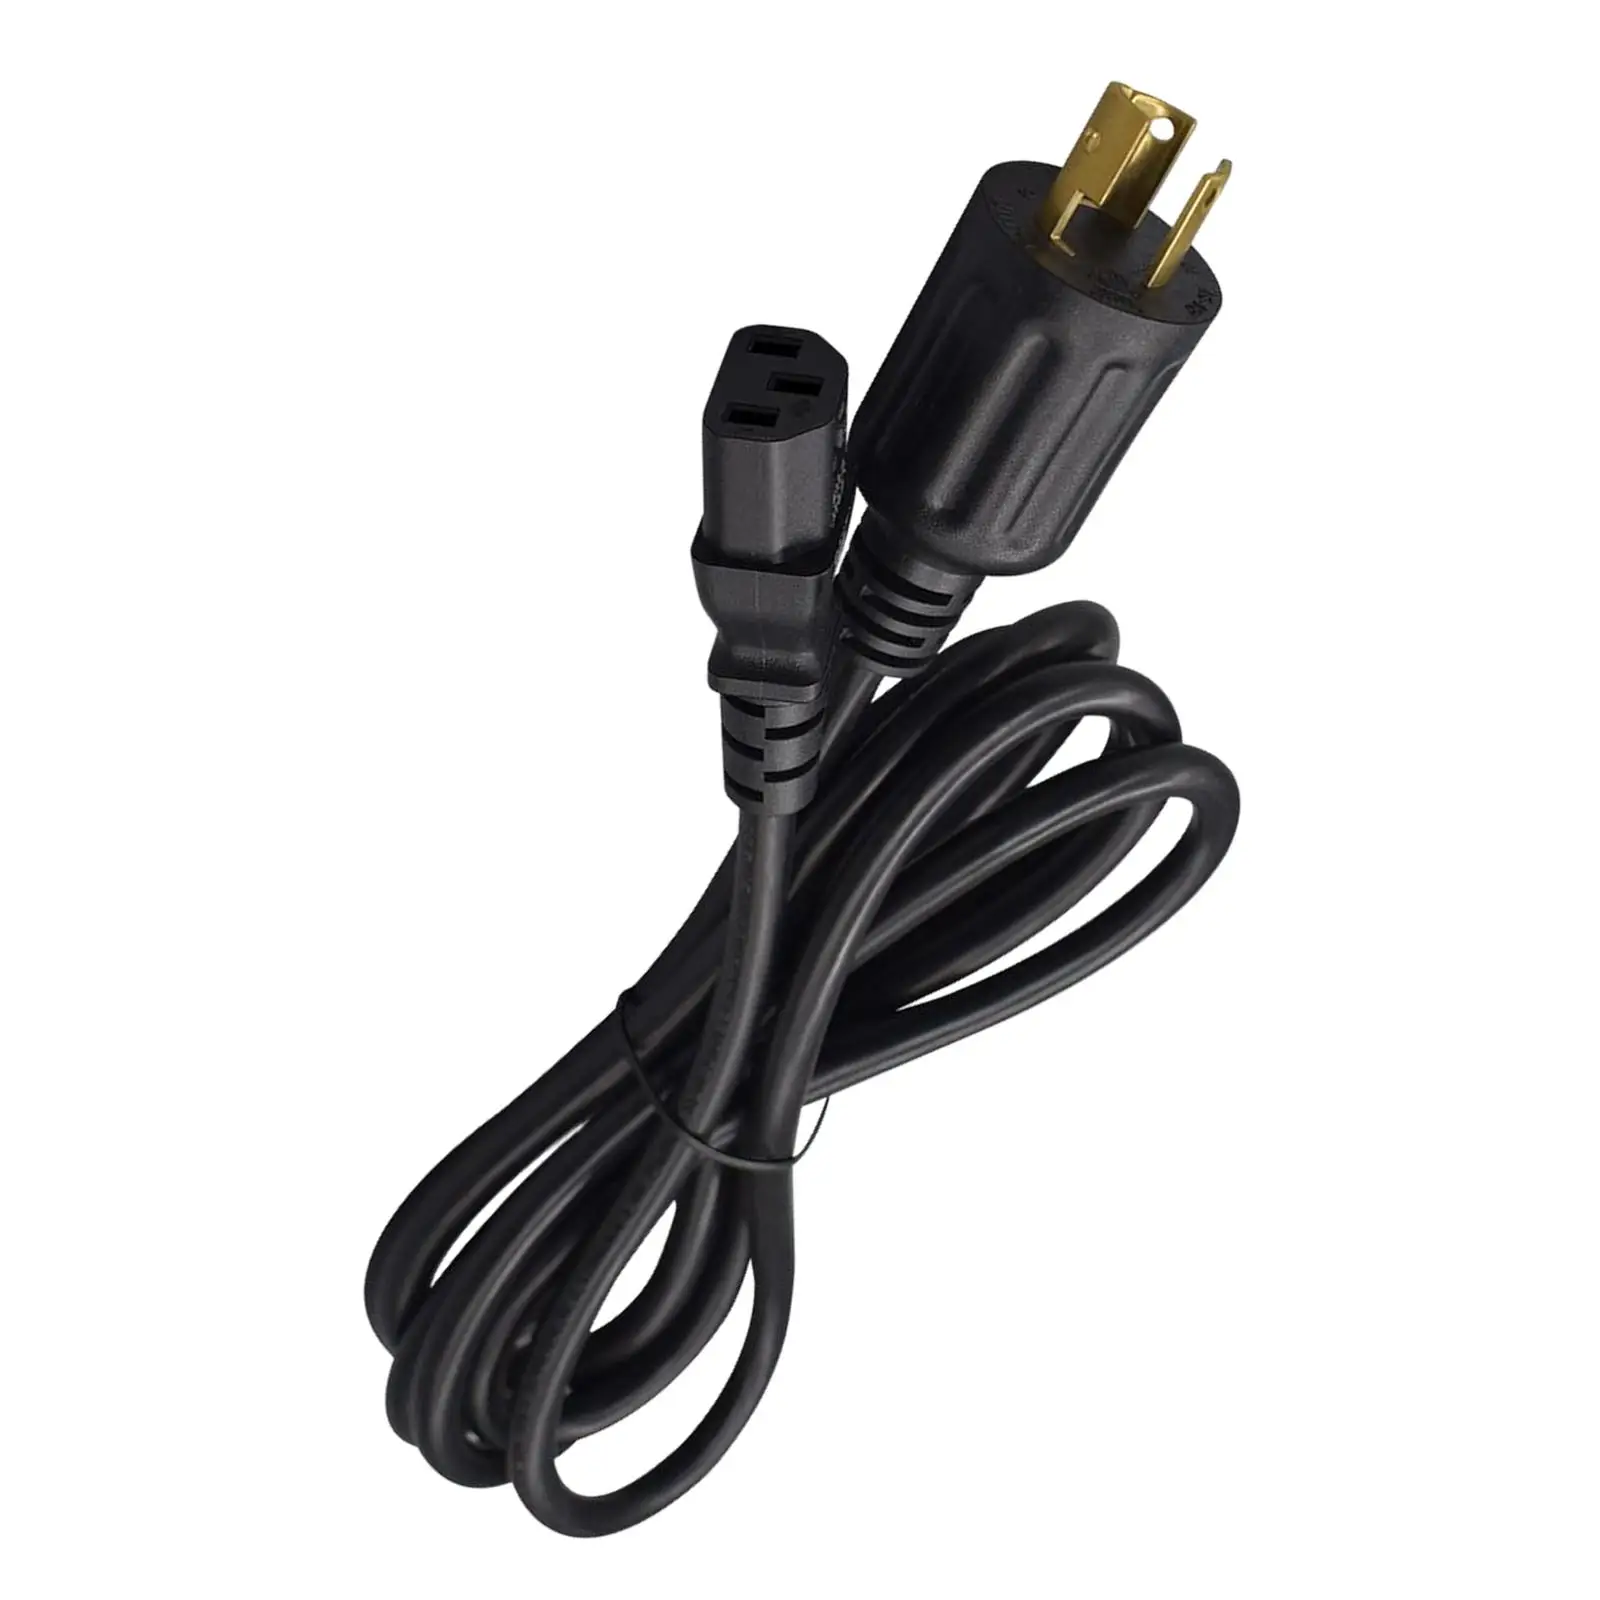 Power Cord L5-30P to IEC 320 C13 125V 15A Black 9.84 Feet Connector Accessories